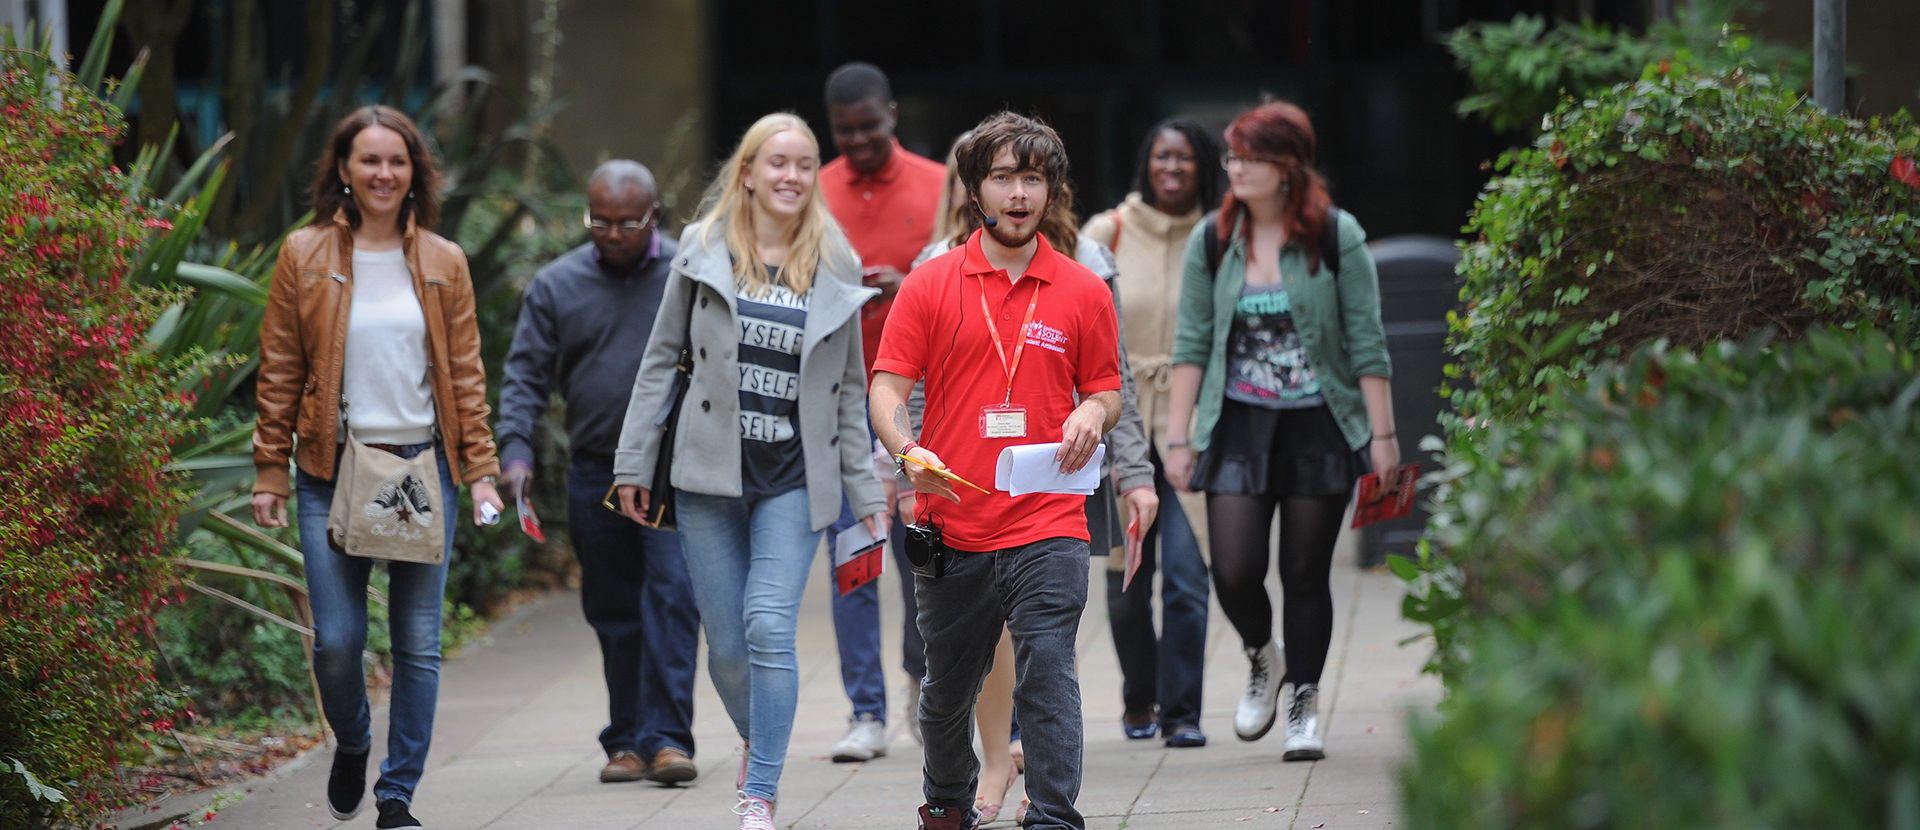 A group of people being led through the campus by a student ambassador in a red t-shirt